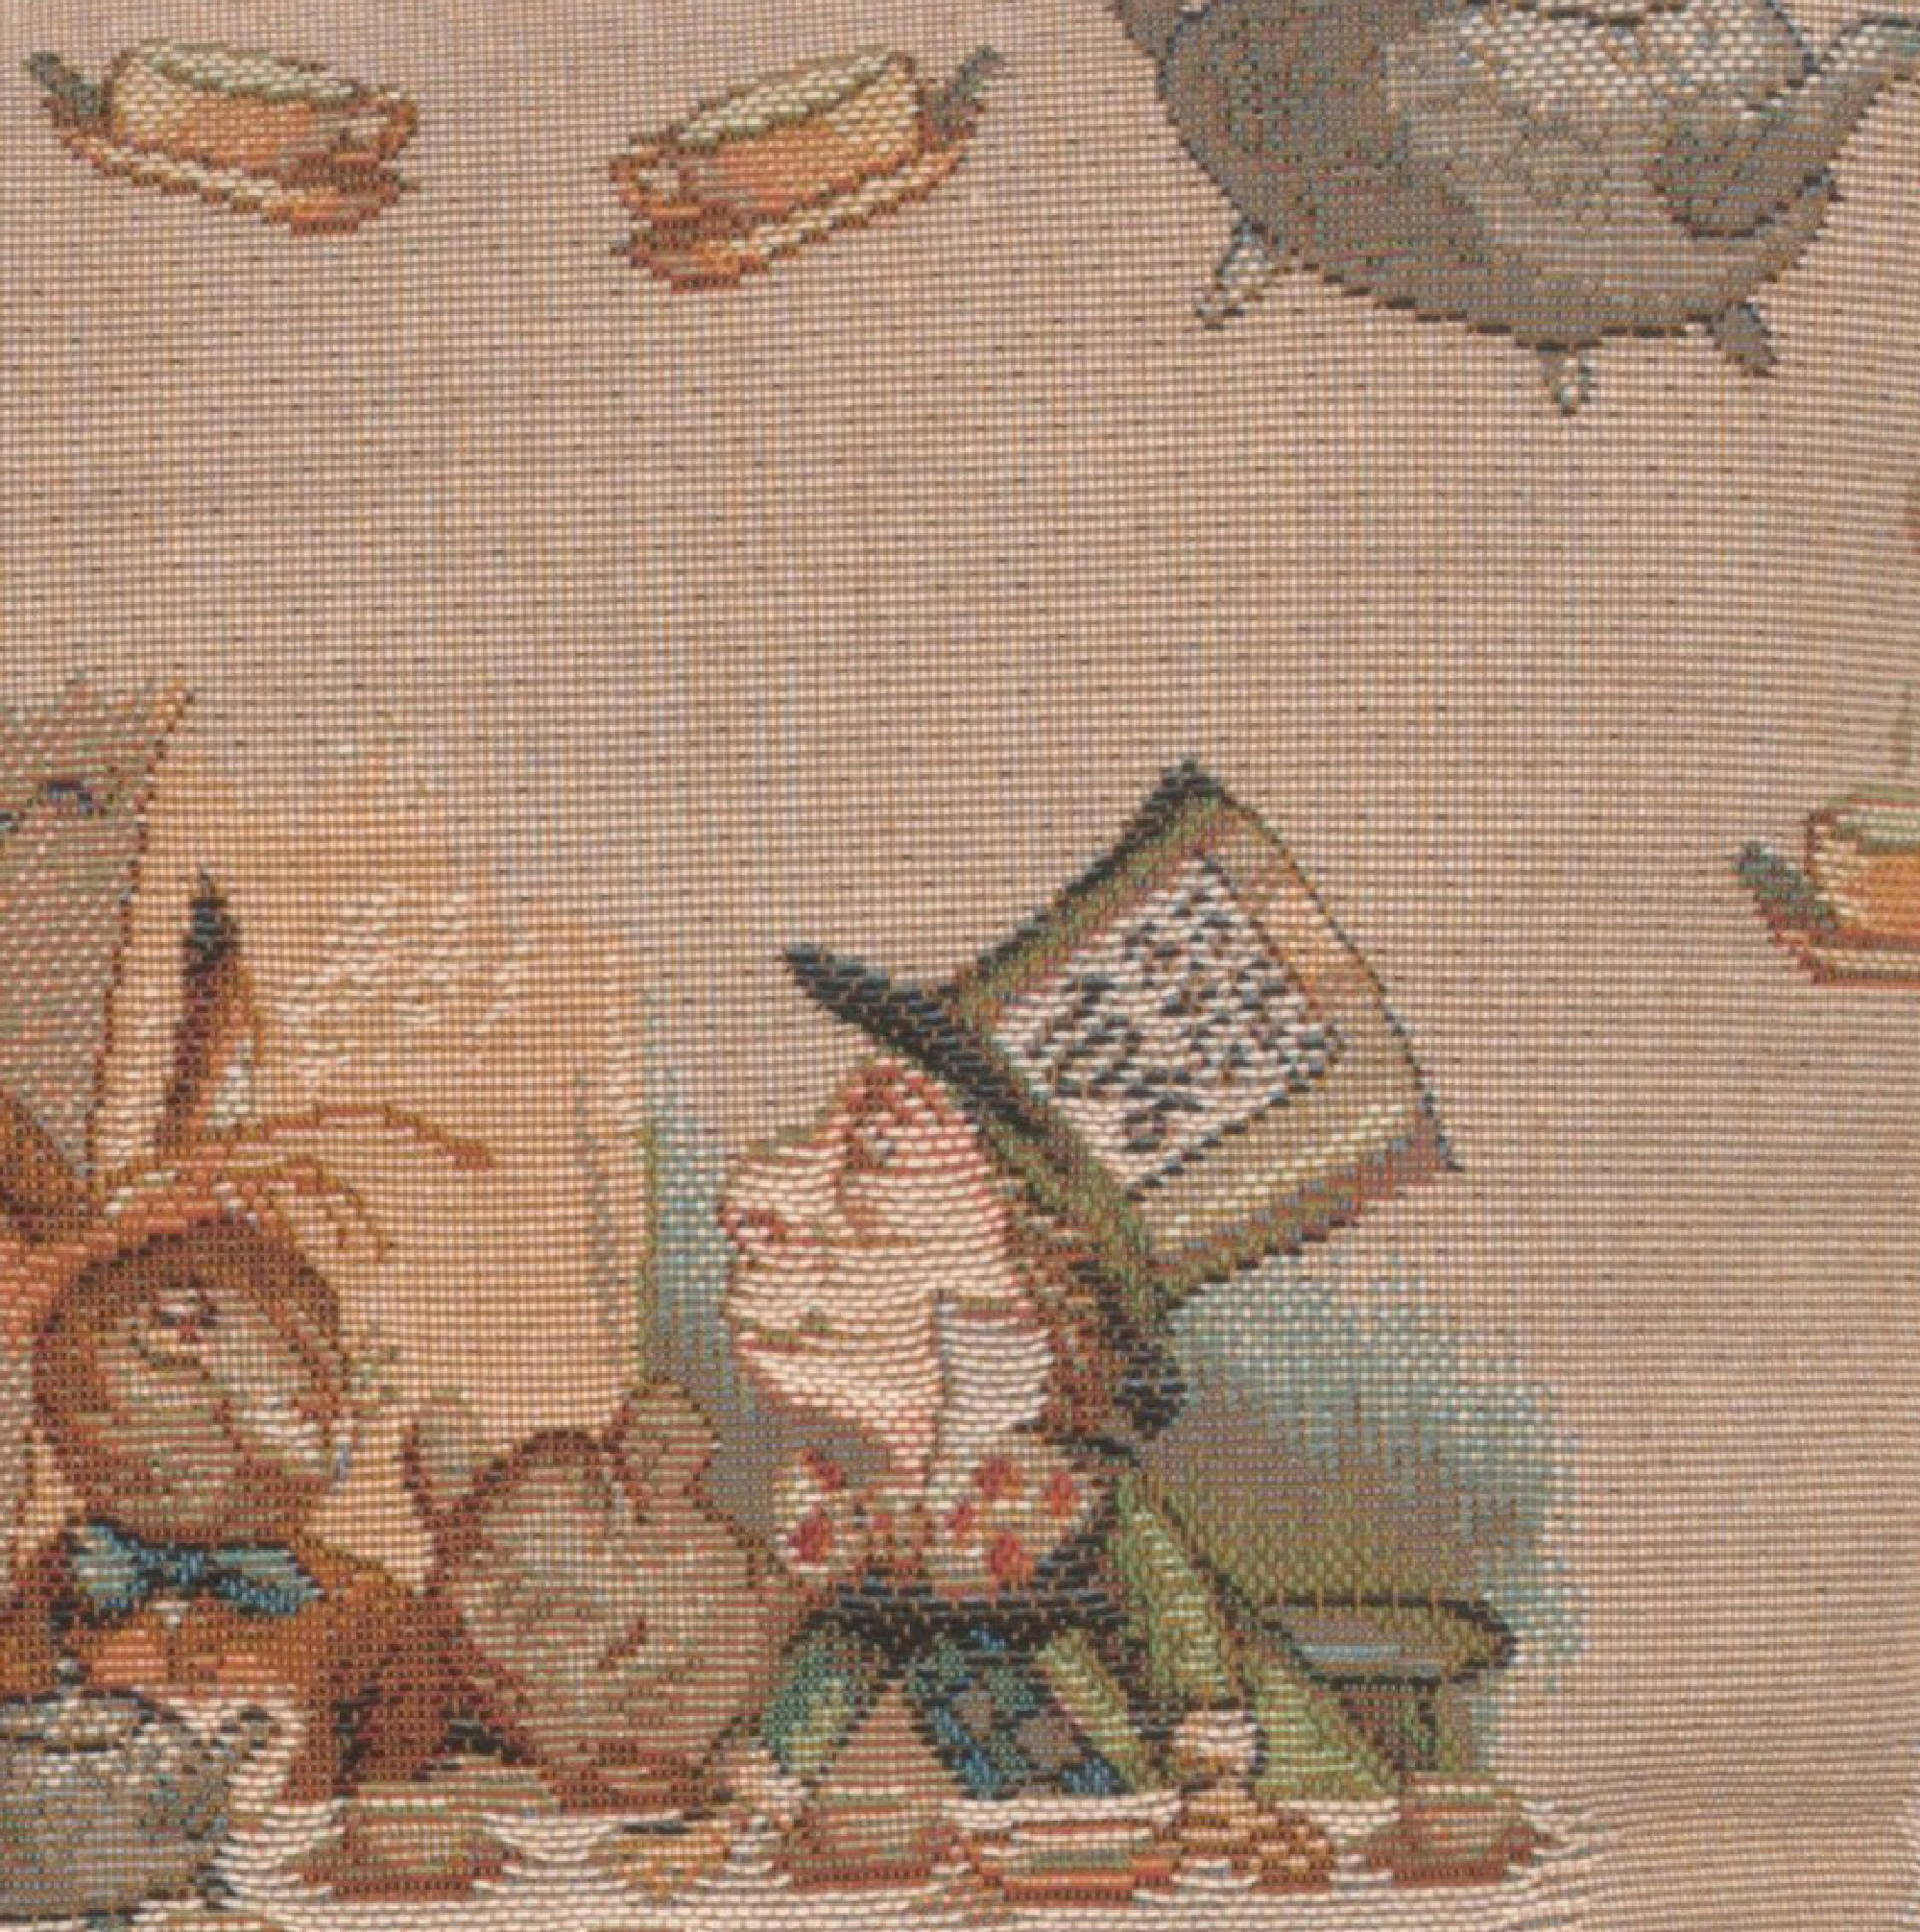 The Tea Party Alice In Wonderland I French Tapestry Cushion | Close Up 4